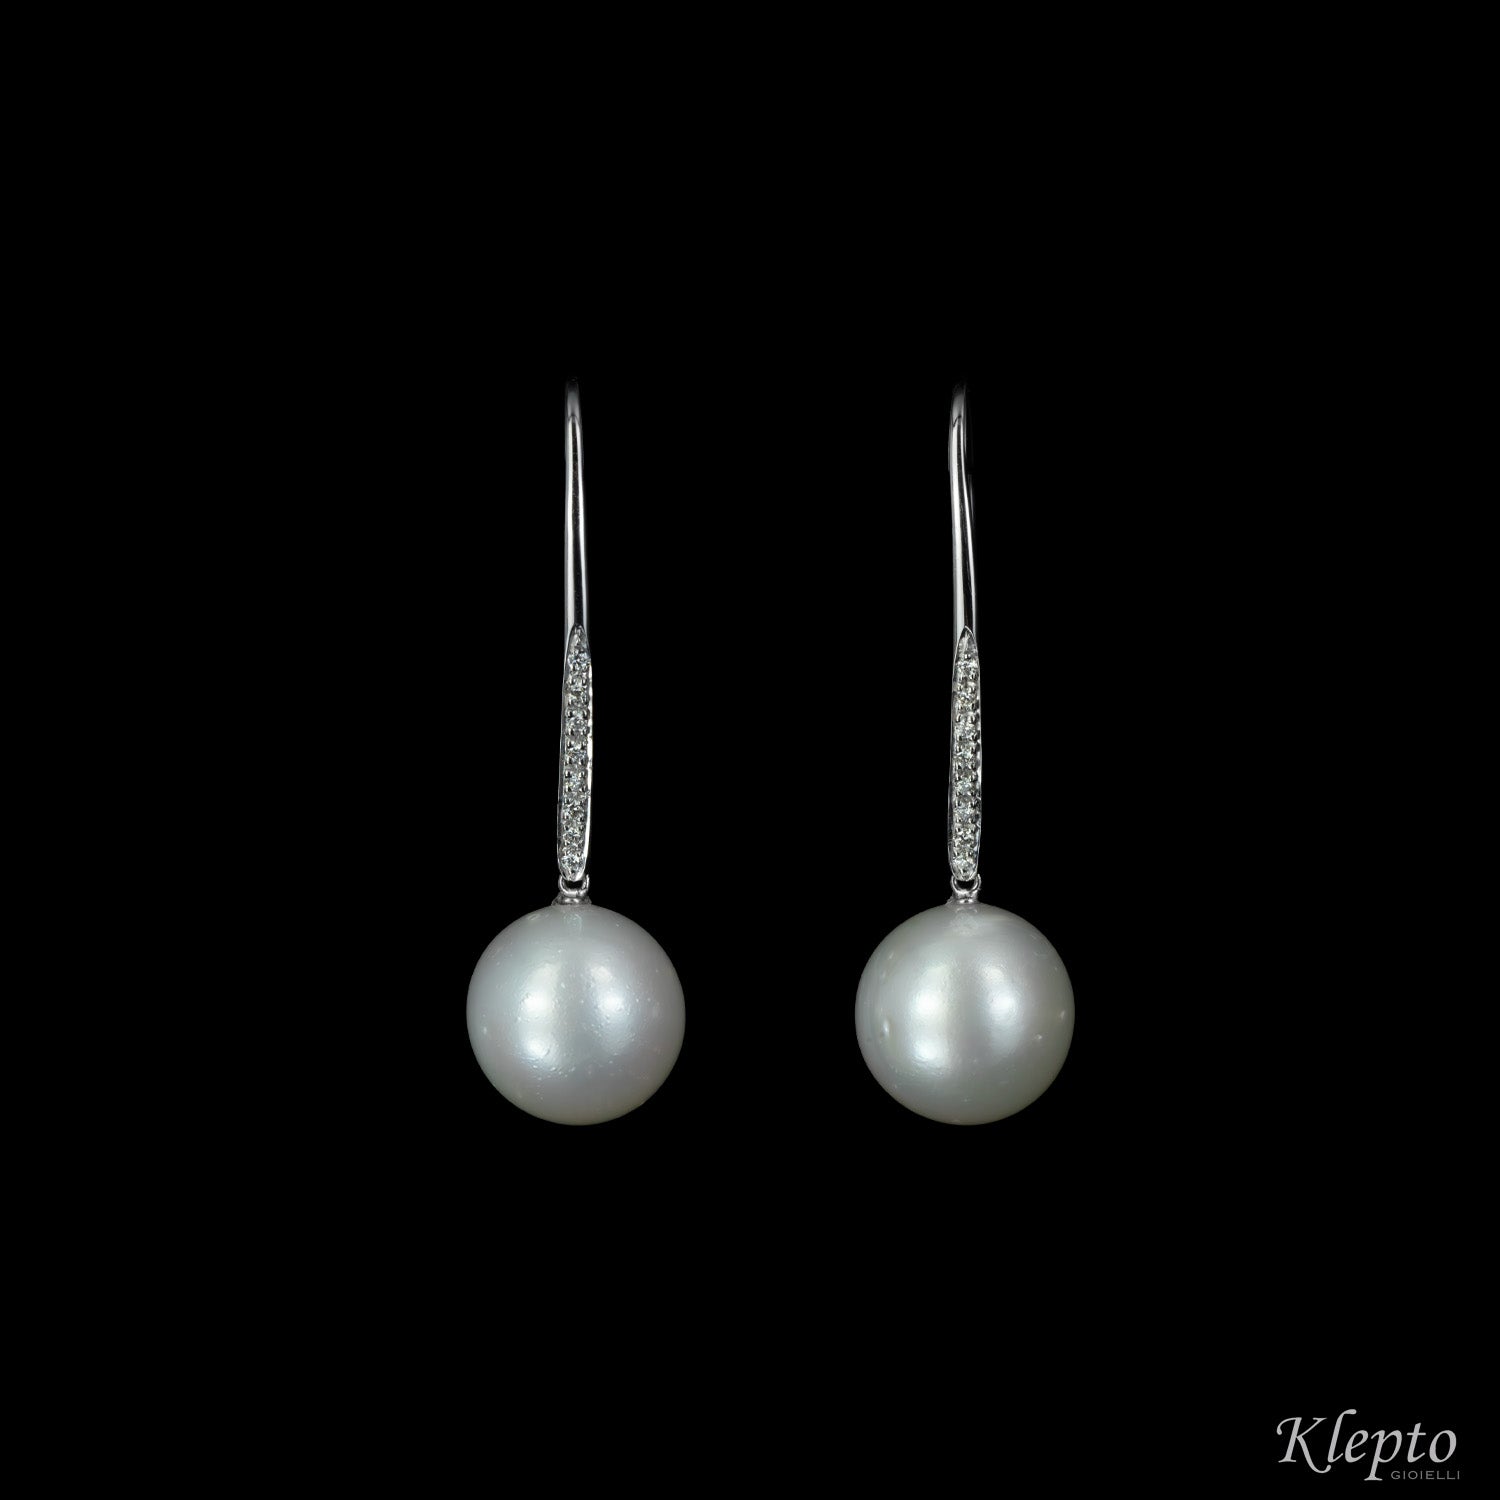 White gold pendant earrings with pearls and diamonds